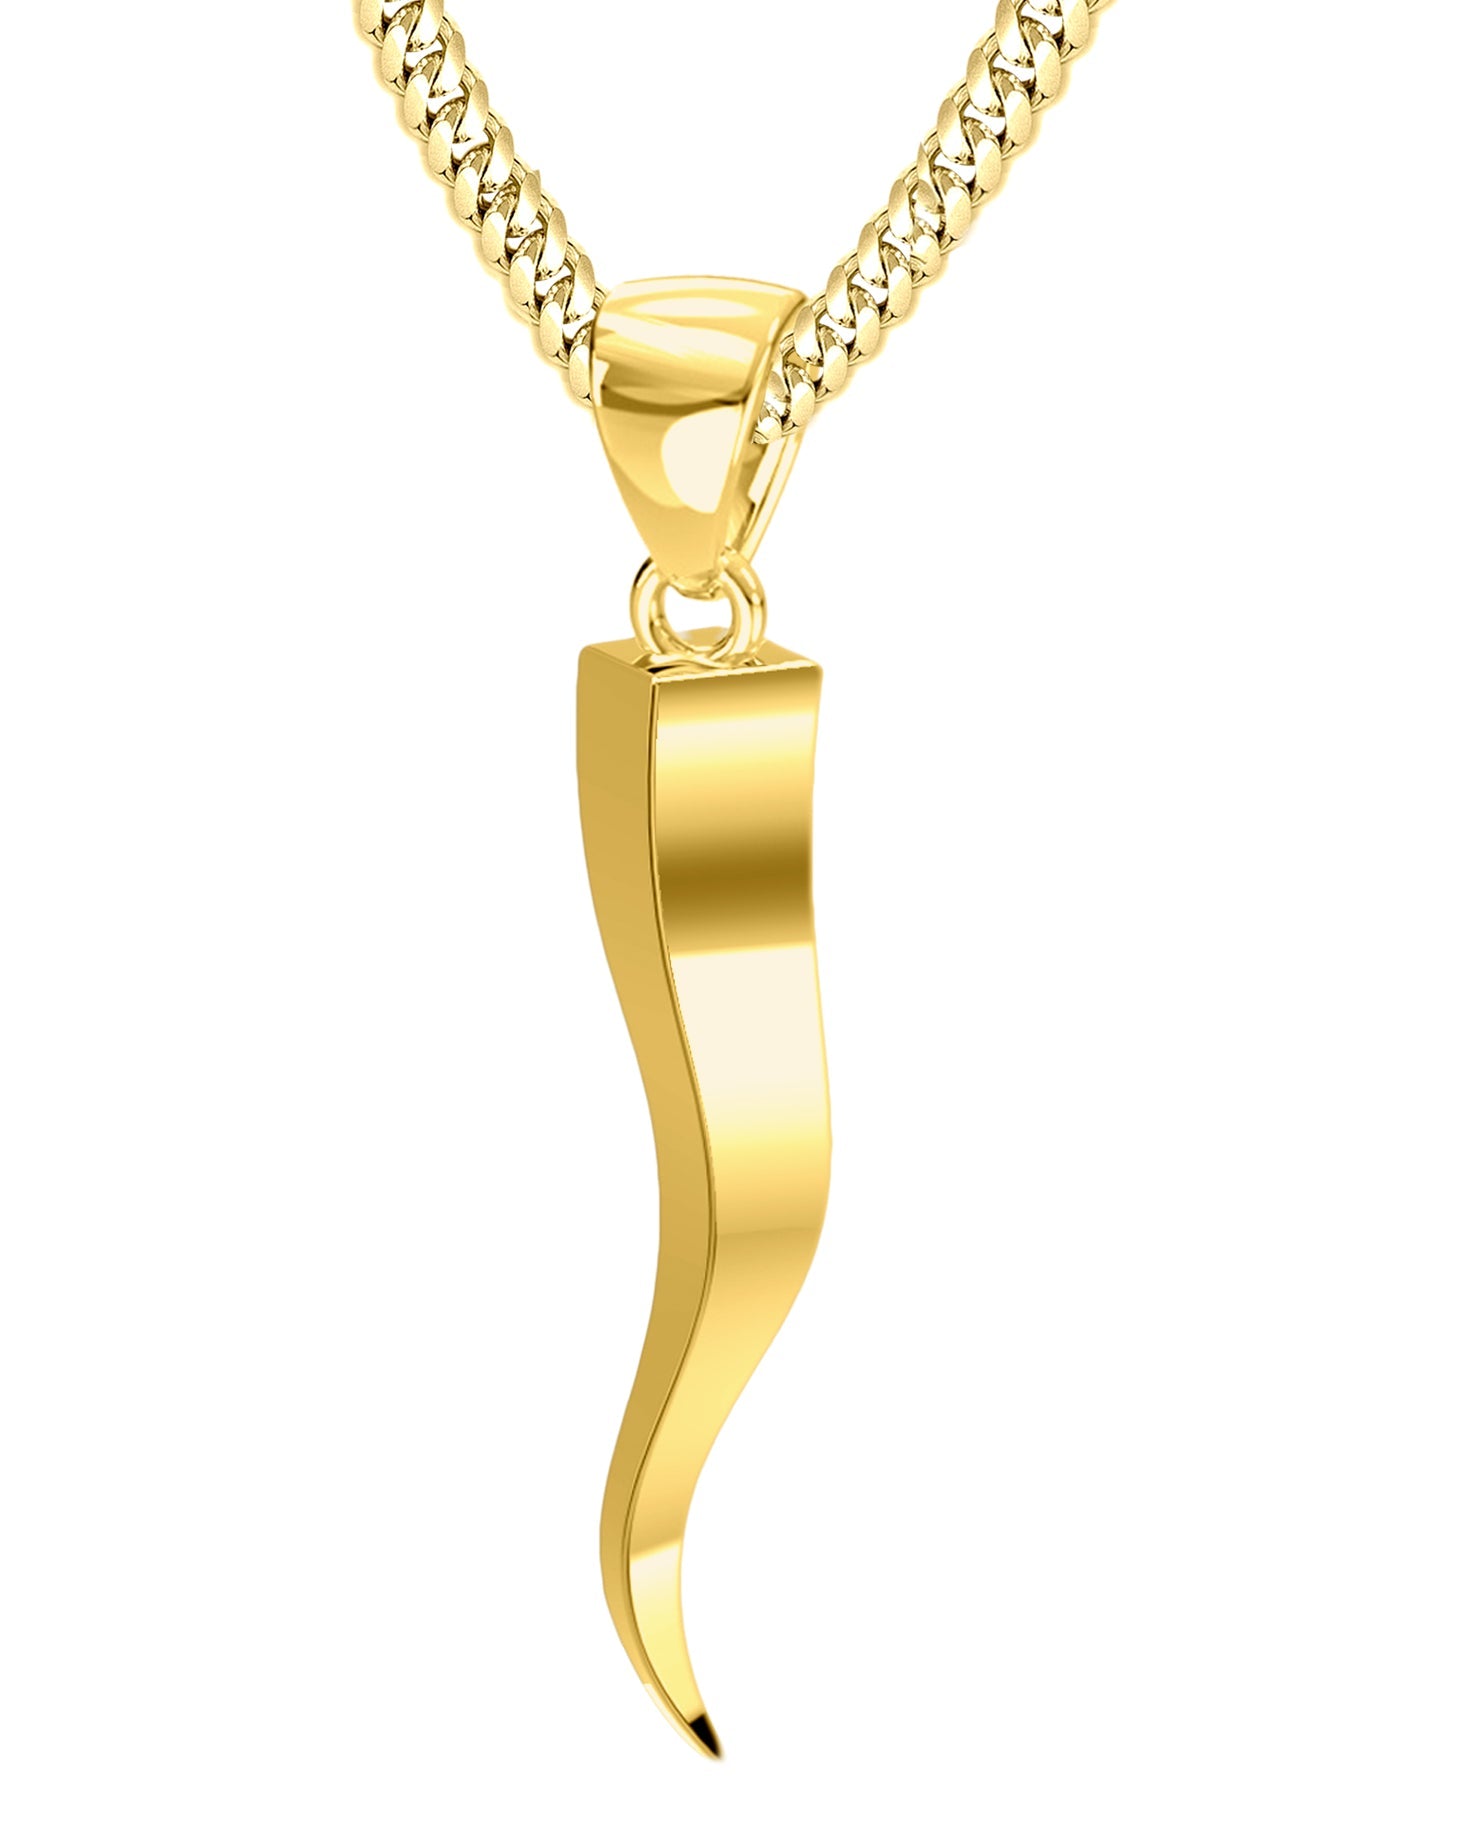 Men's Squared Solid 14k Italian Horn Cornicello Amulet Pendant Necklace, 30mm - US Jewels